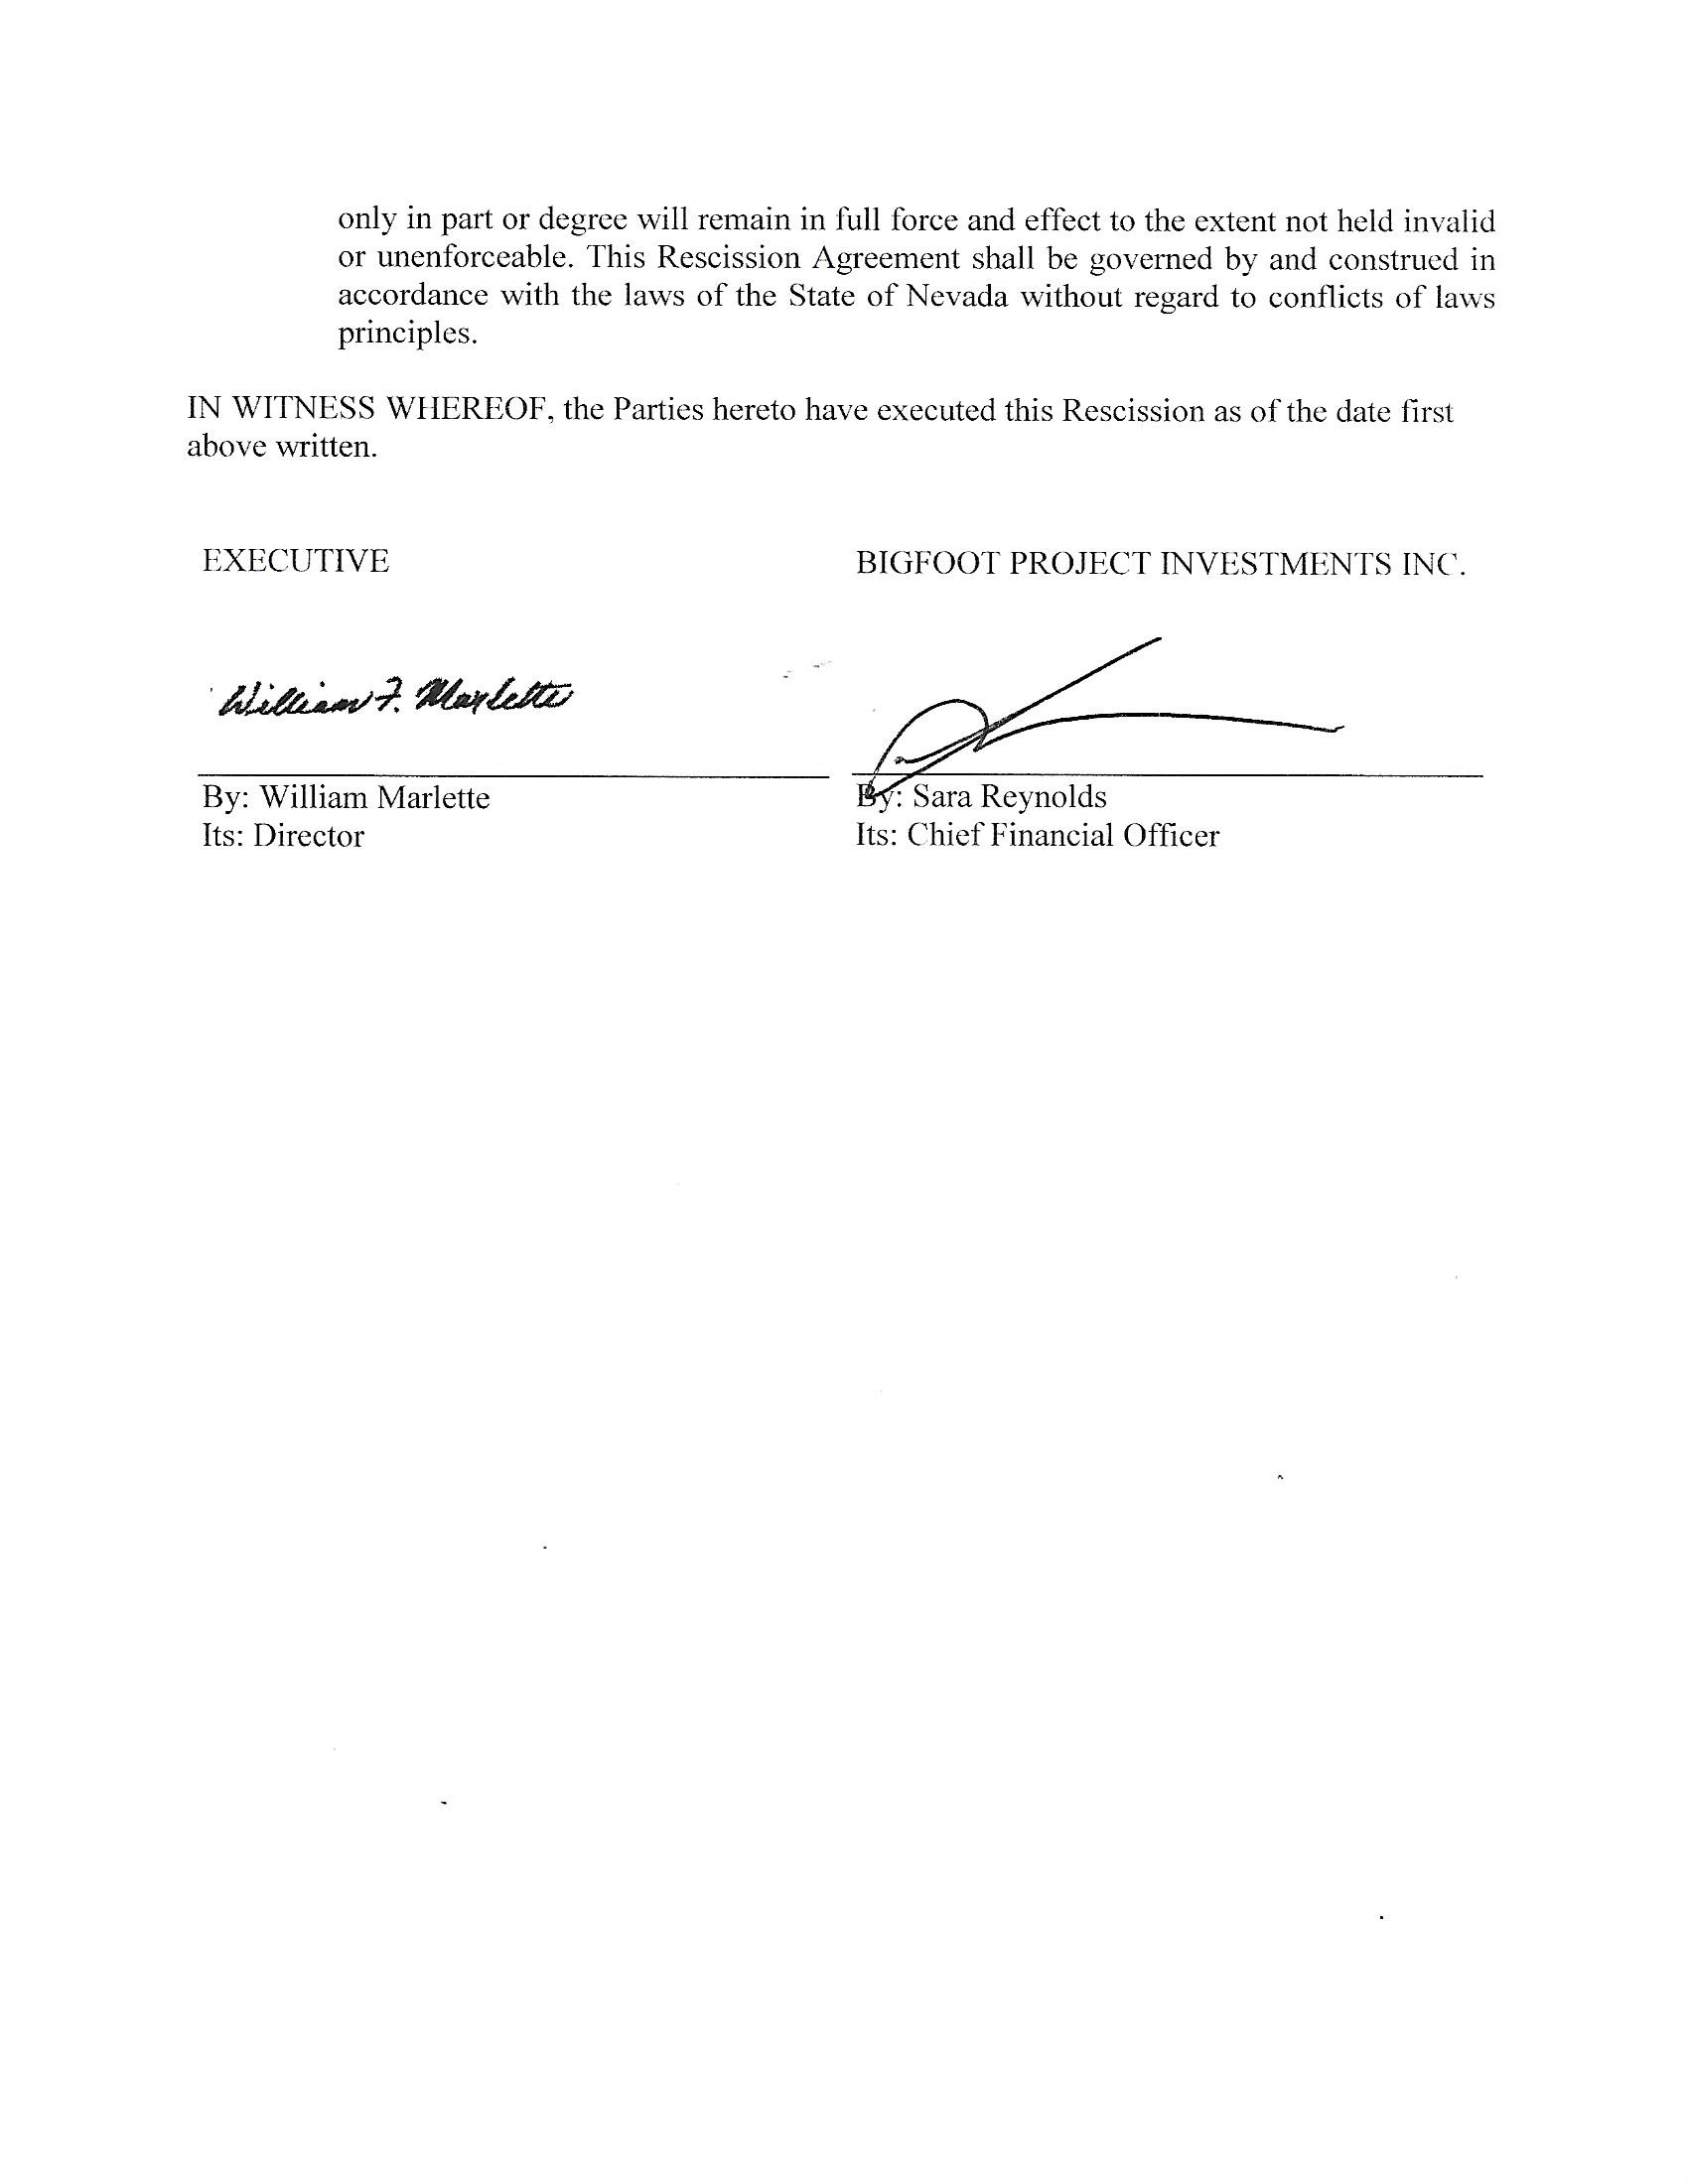 Restricted Stock Award Rescission Agreement_William Marlette.102_Page_3.jpg